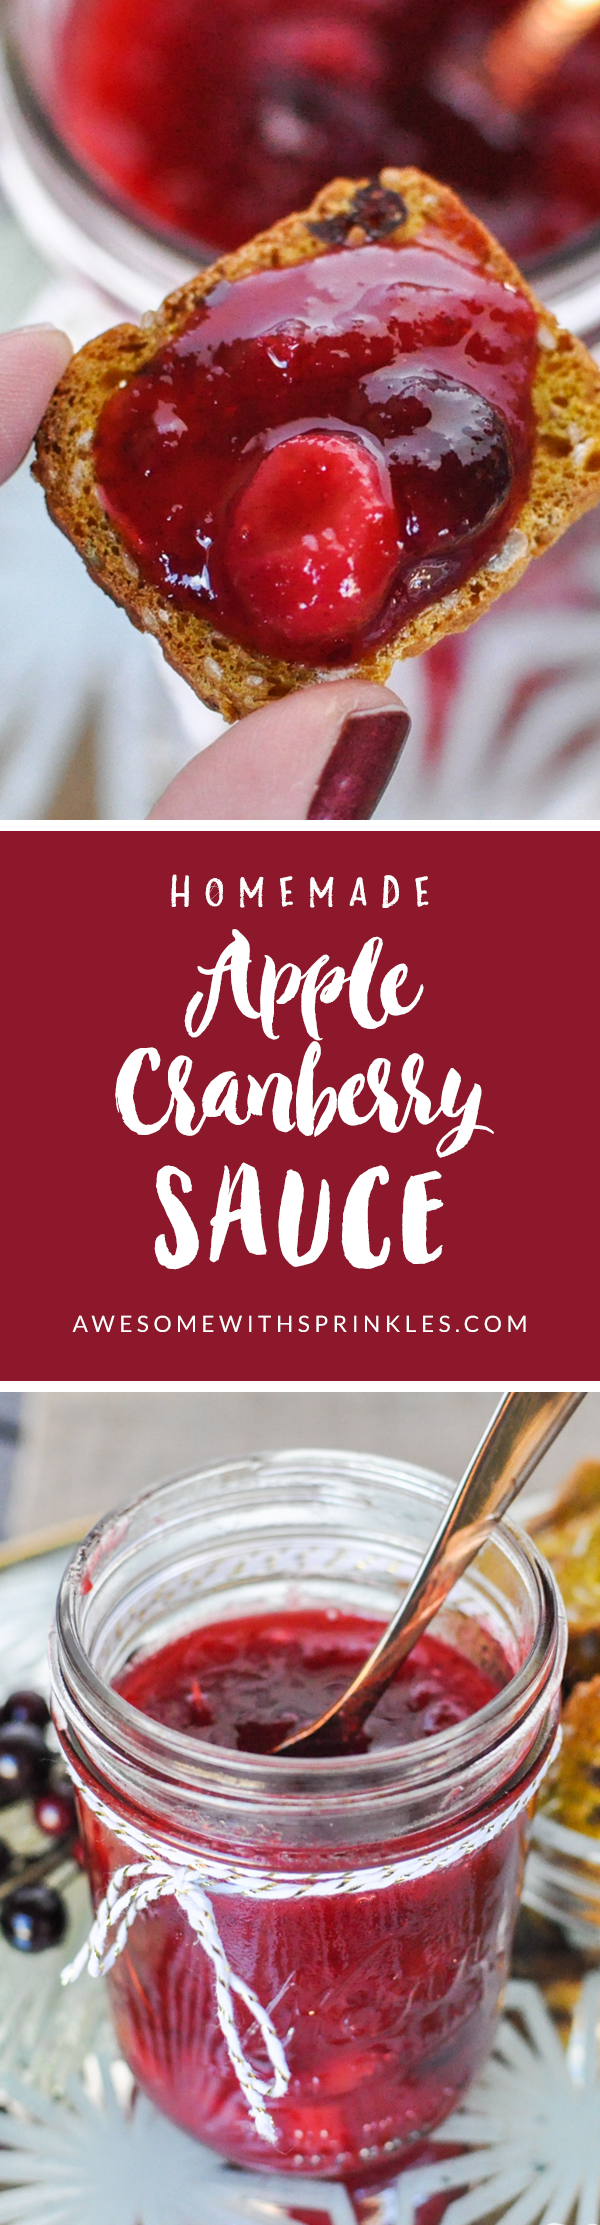 Apple Cranberry Sauce | Awesome with Sprinkles